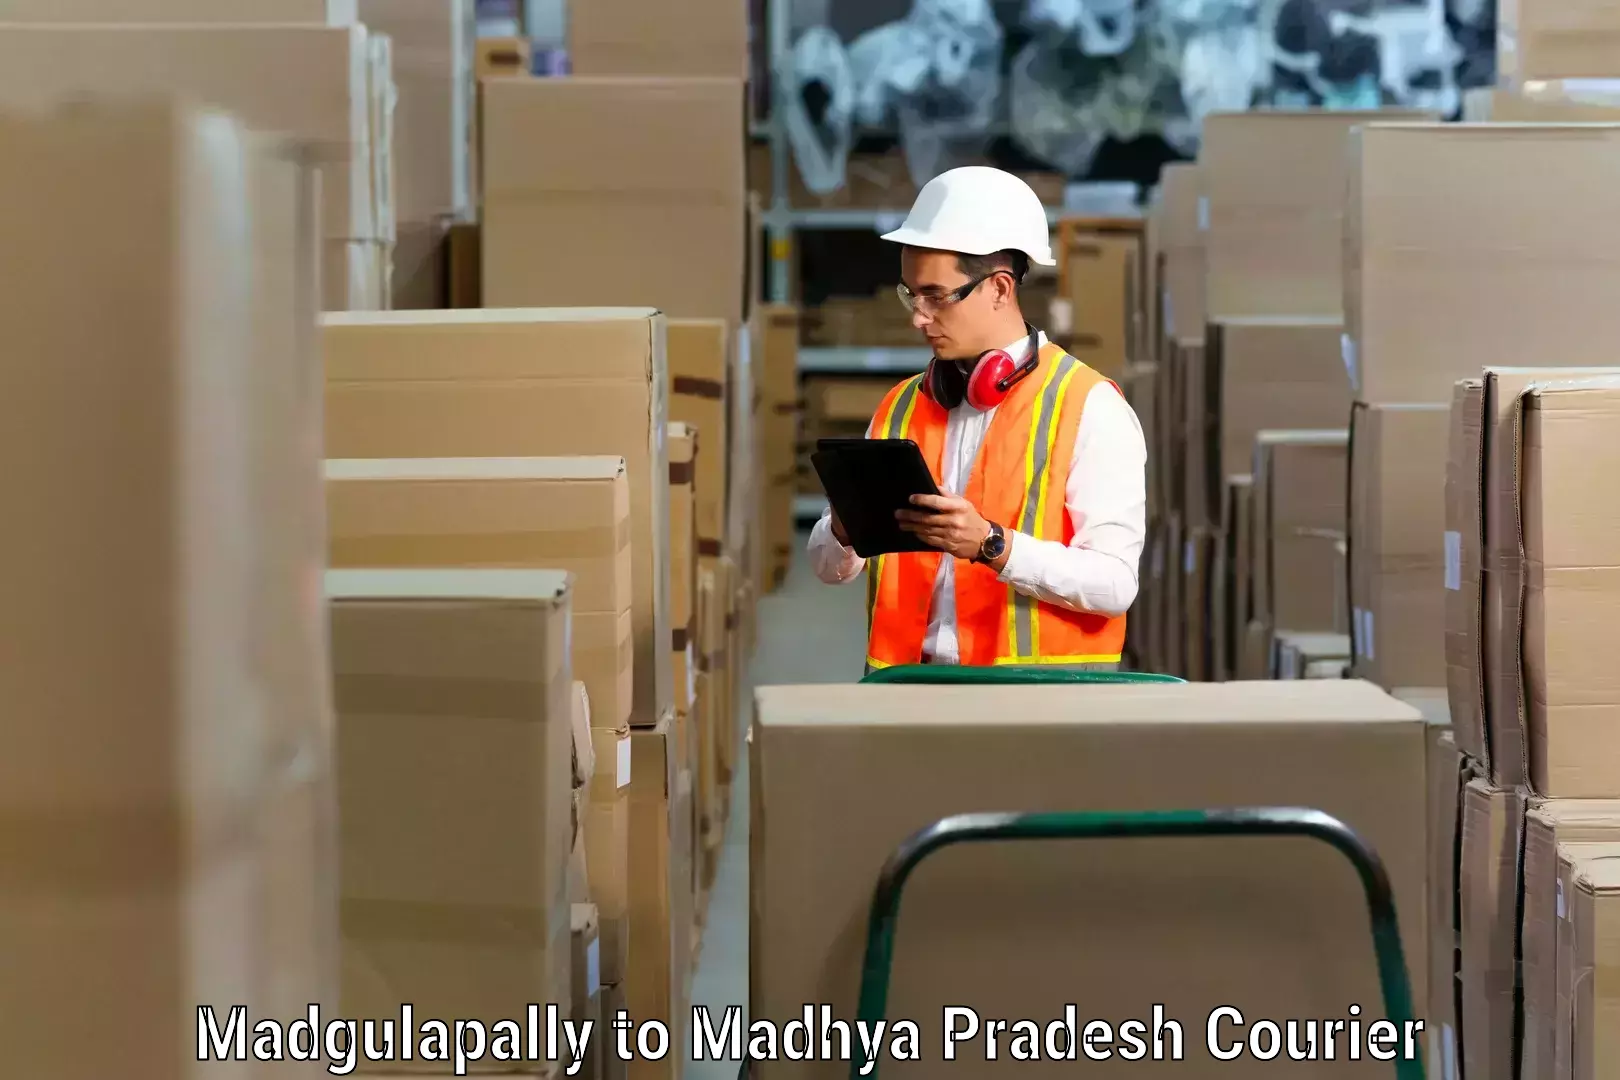 Furniture moving specialists Madgulapally to Seoni